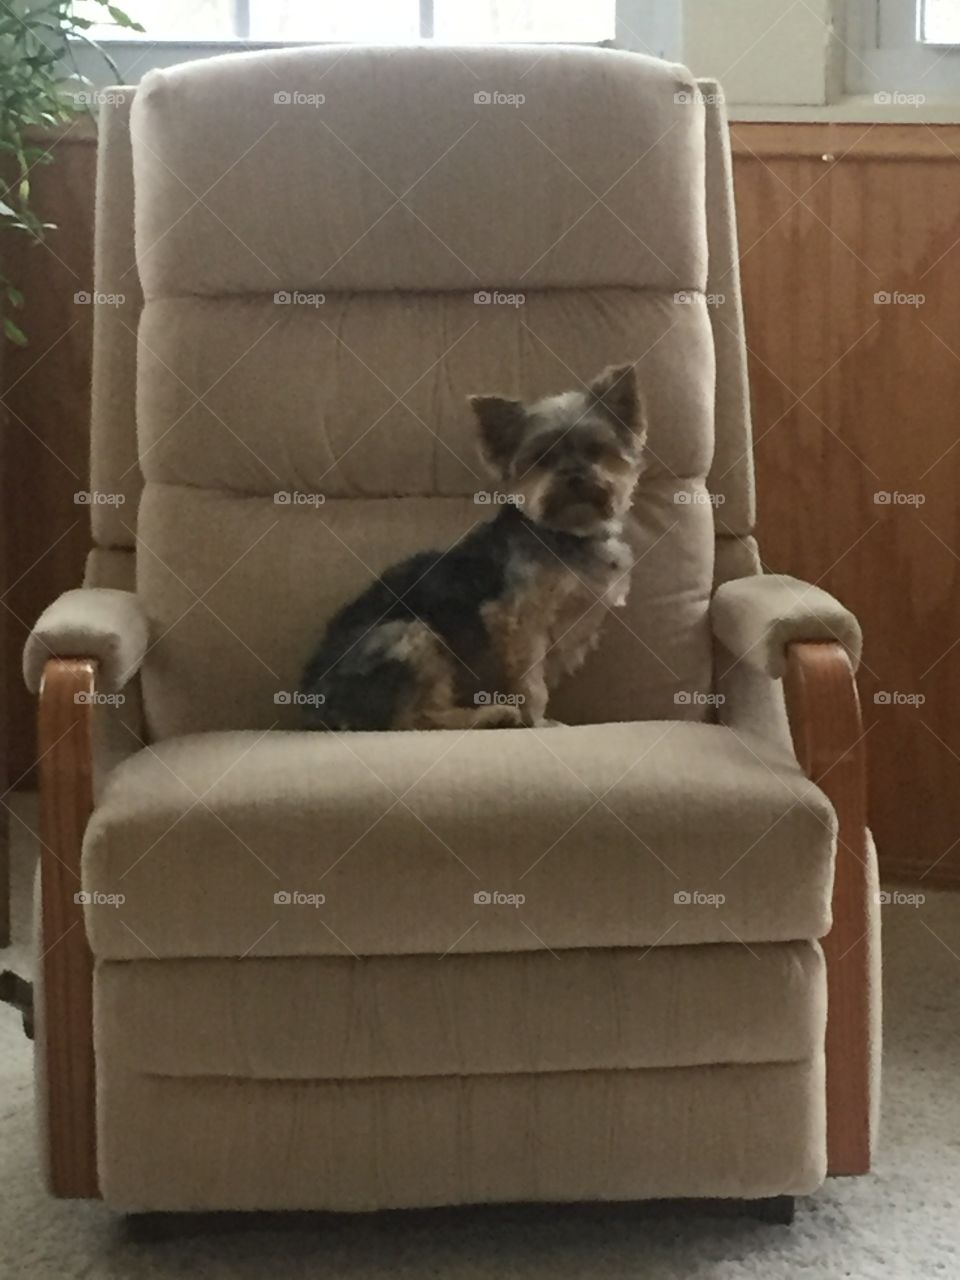 Dog in chair
